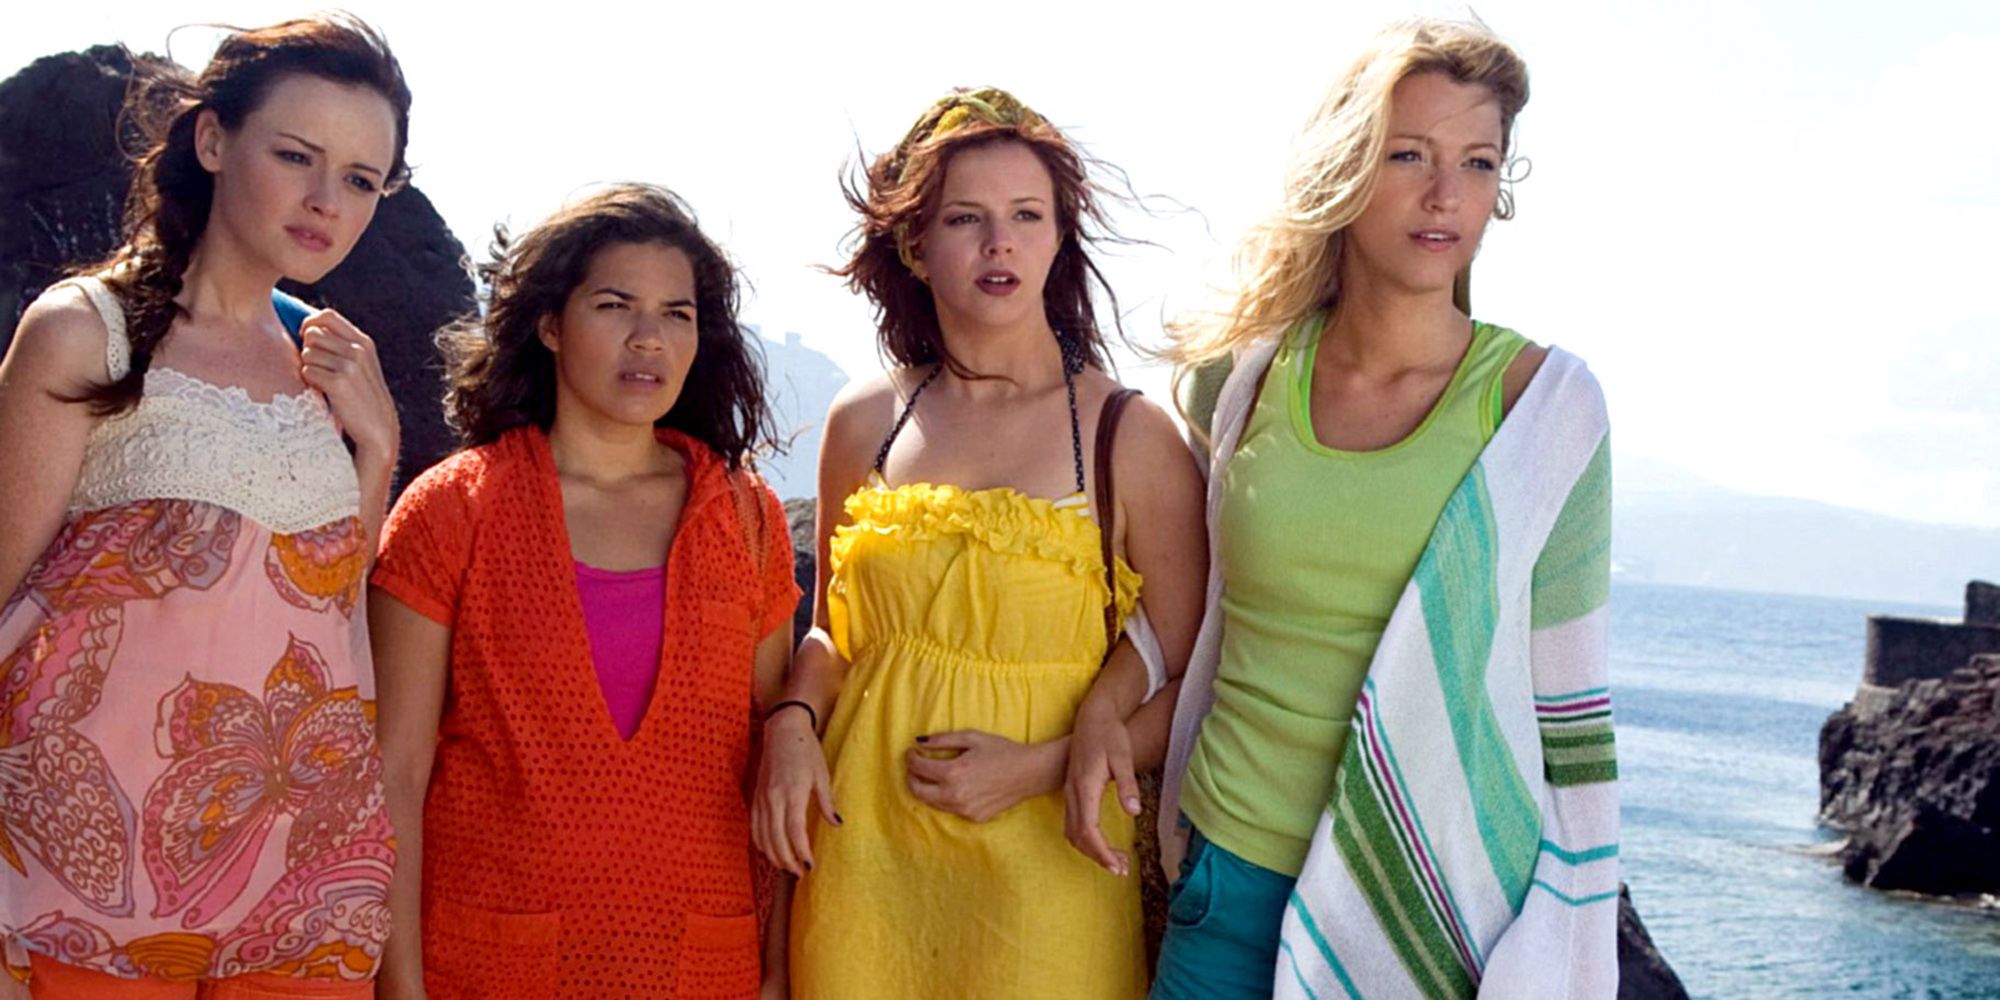 The Sisterhood Of The Traveling Pants The Cast Then And Now